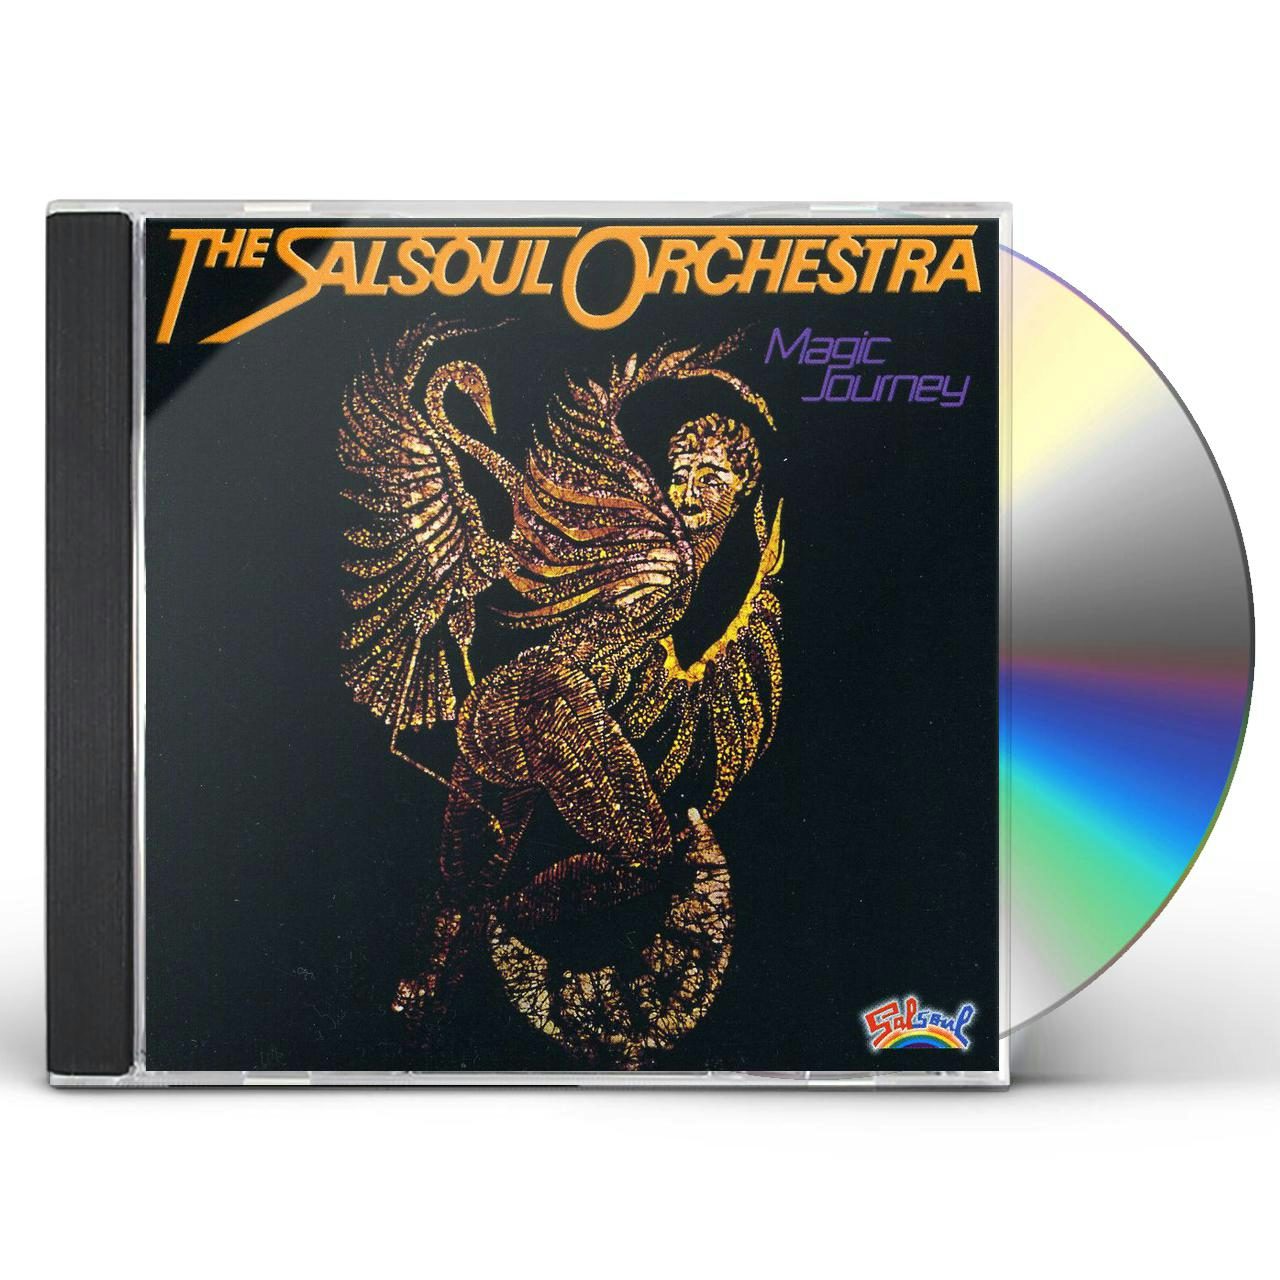 The Salsoul Orchestra MAGIC JOURNEY CD